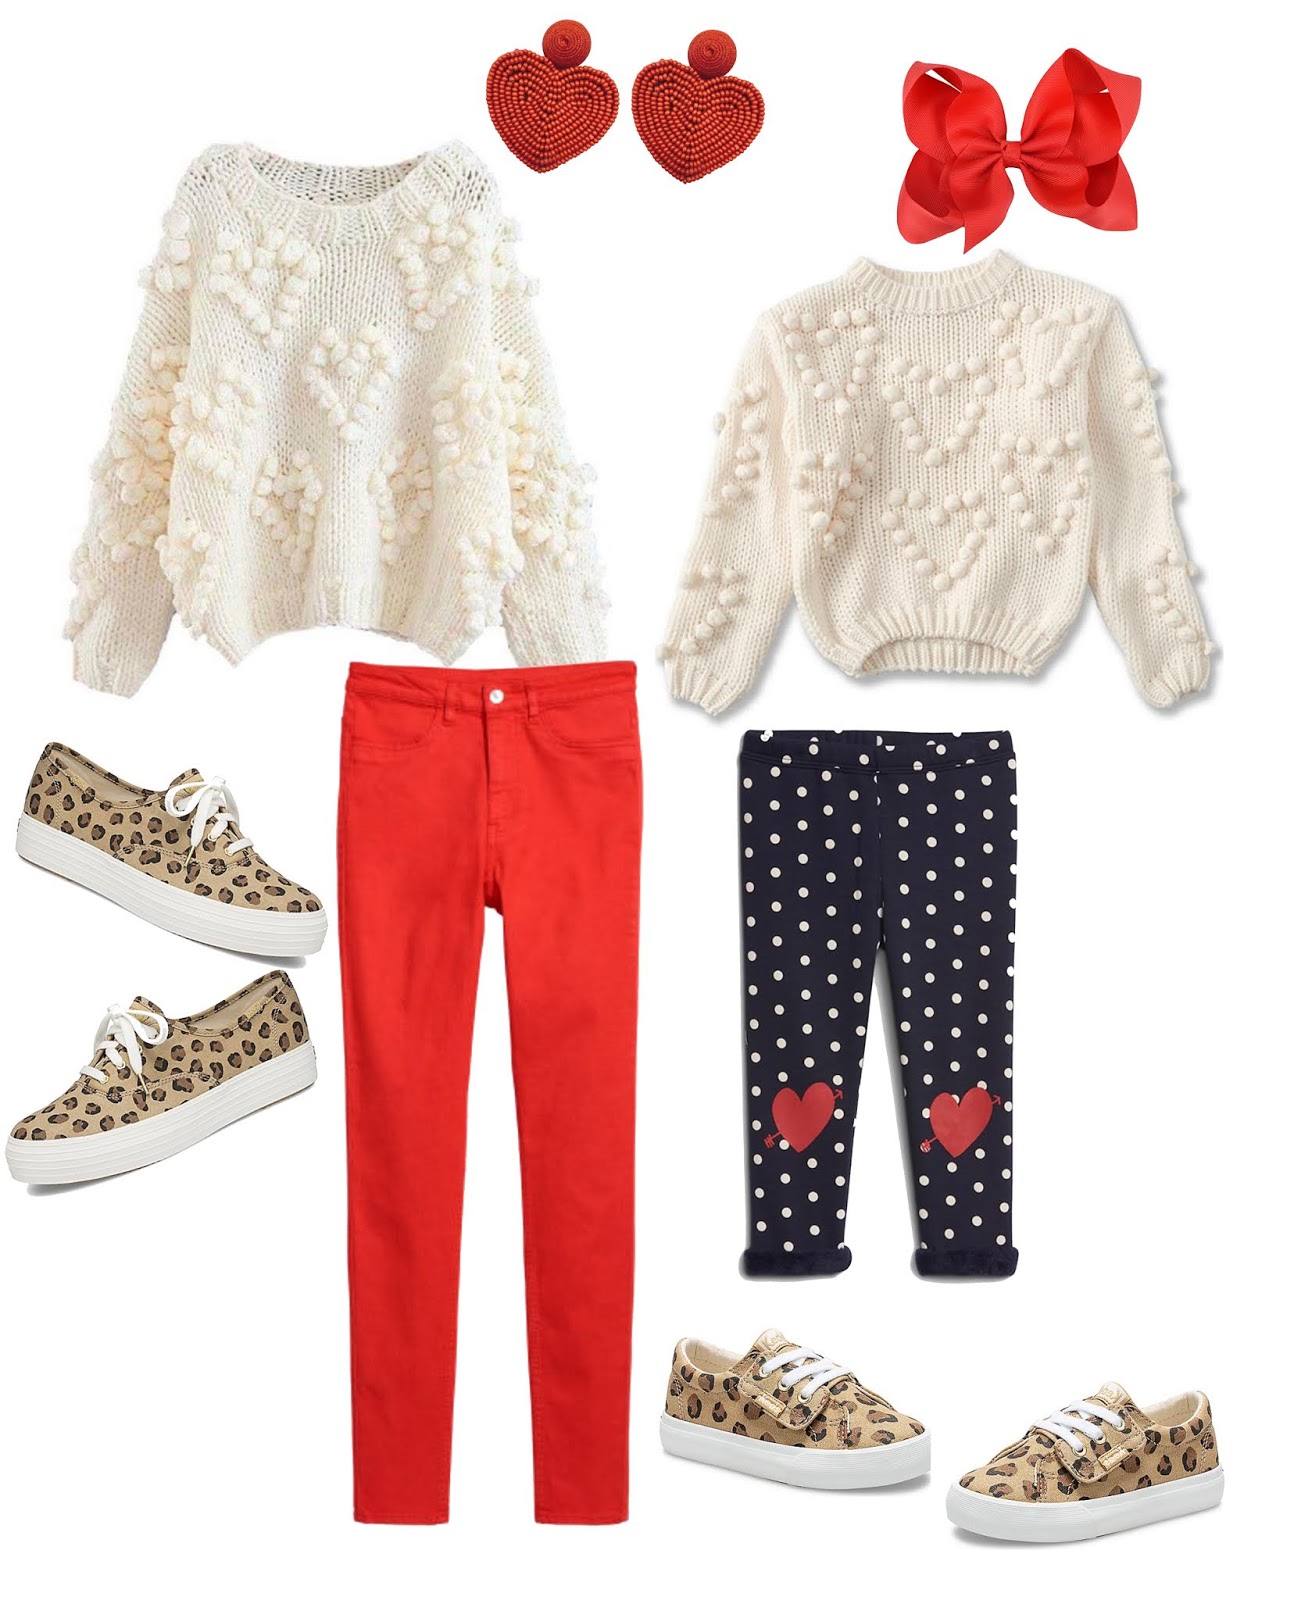 Five Head to Toe Outfits for Valentine's Day - Something Delightful Blog #ValentinesDay #Hearts #VDay #ValentinesOutfit #Womensfashion #KidsFashion